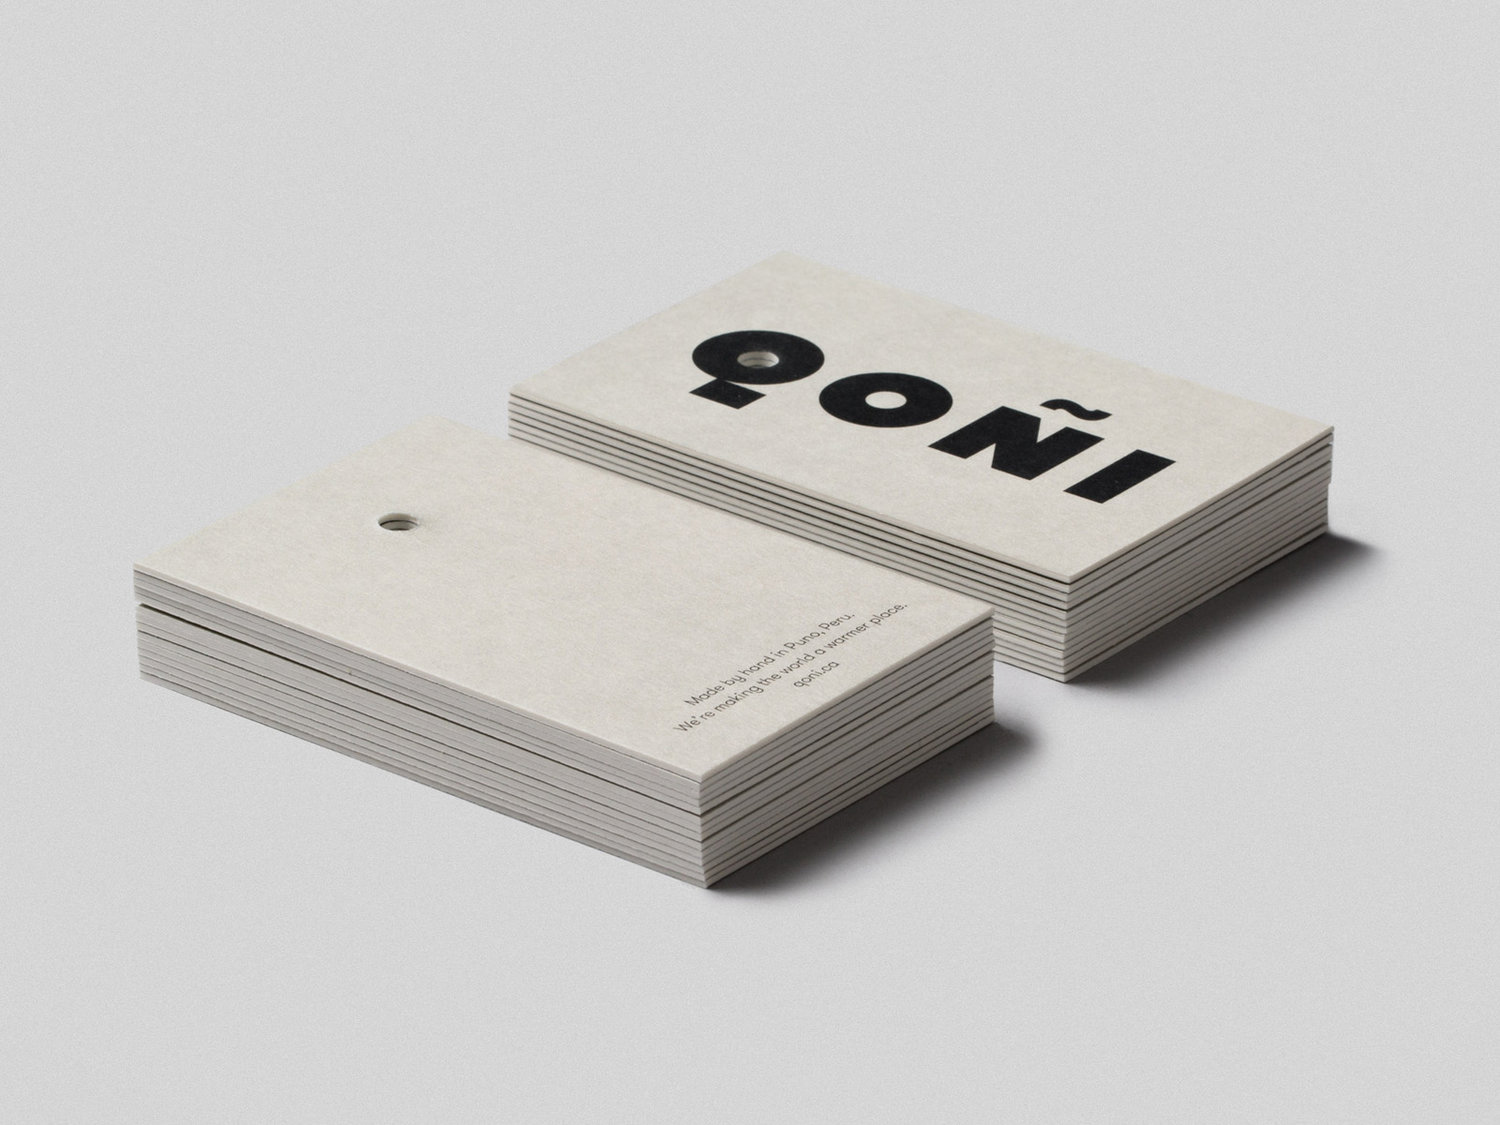 Logotype and uncoated and unbleached products tags by Toronto-based Leo Burnett Design for Peruvian handmade knitwear brand Qoñi